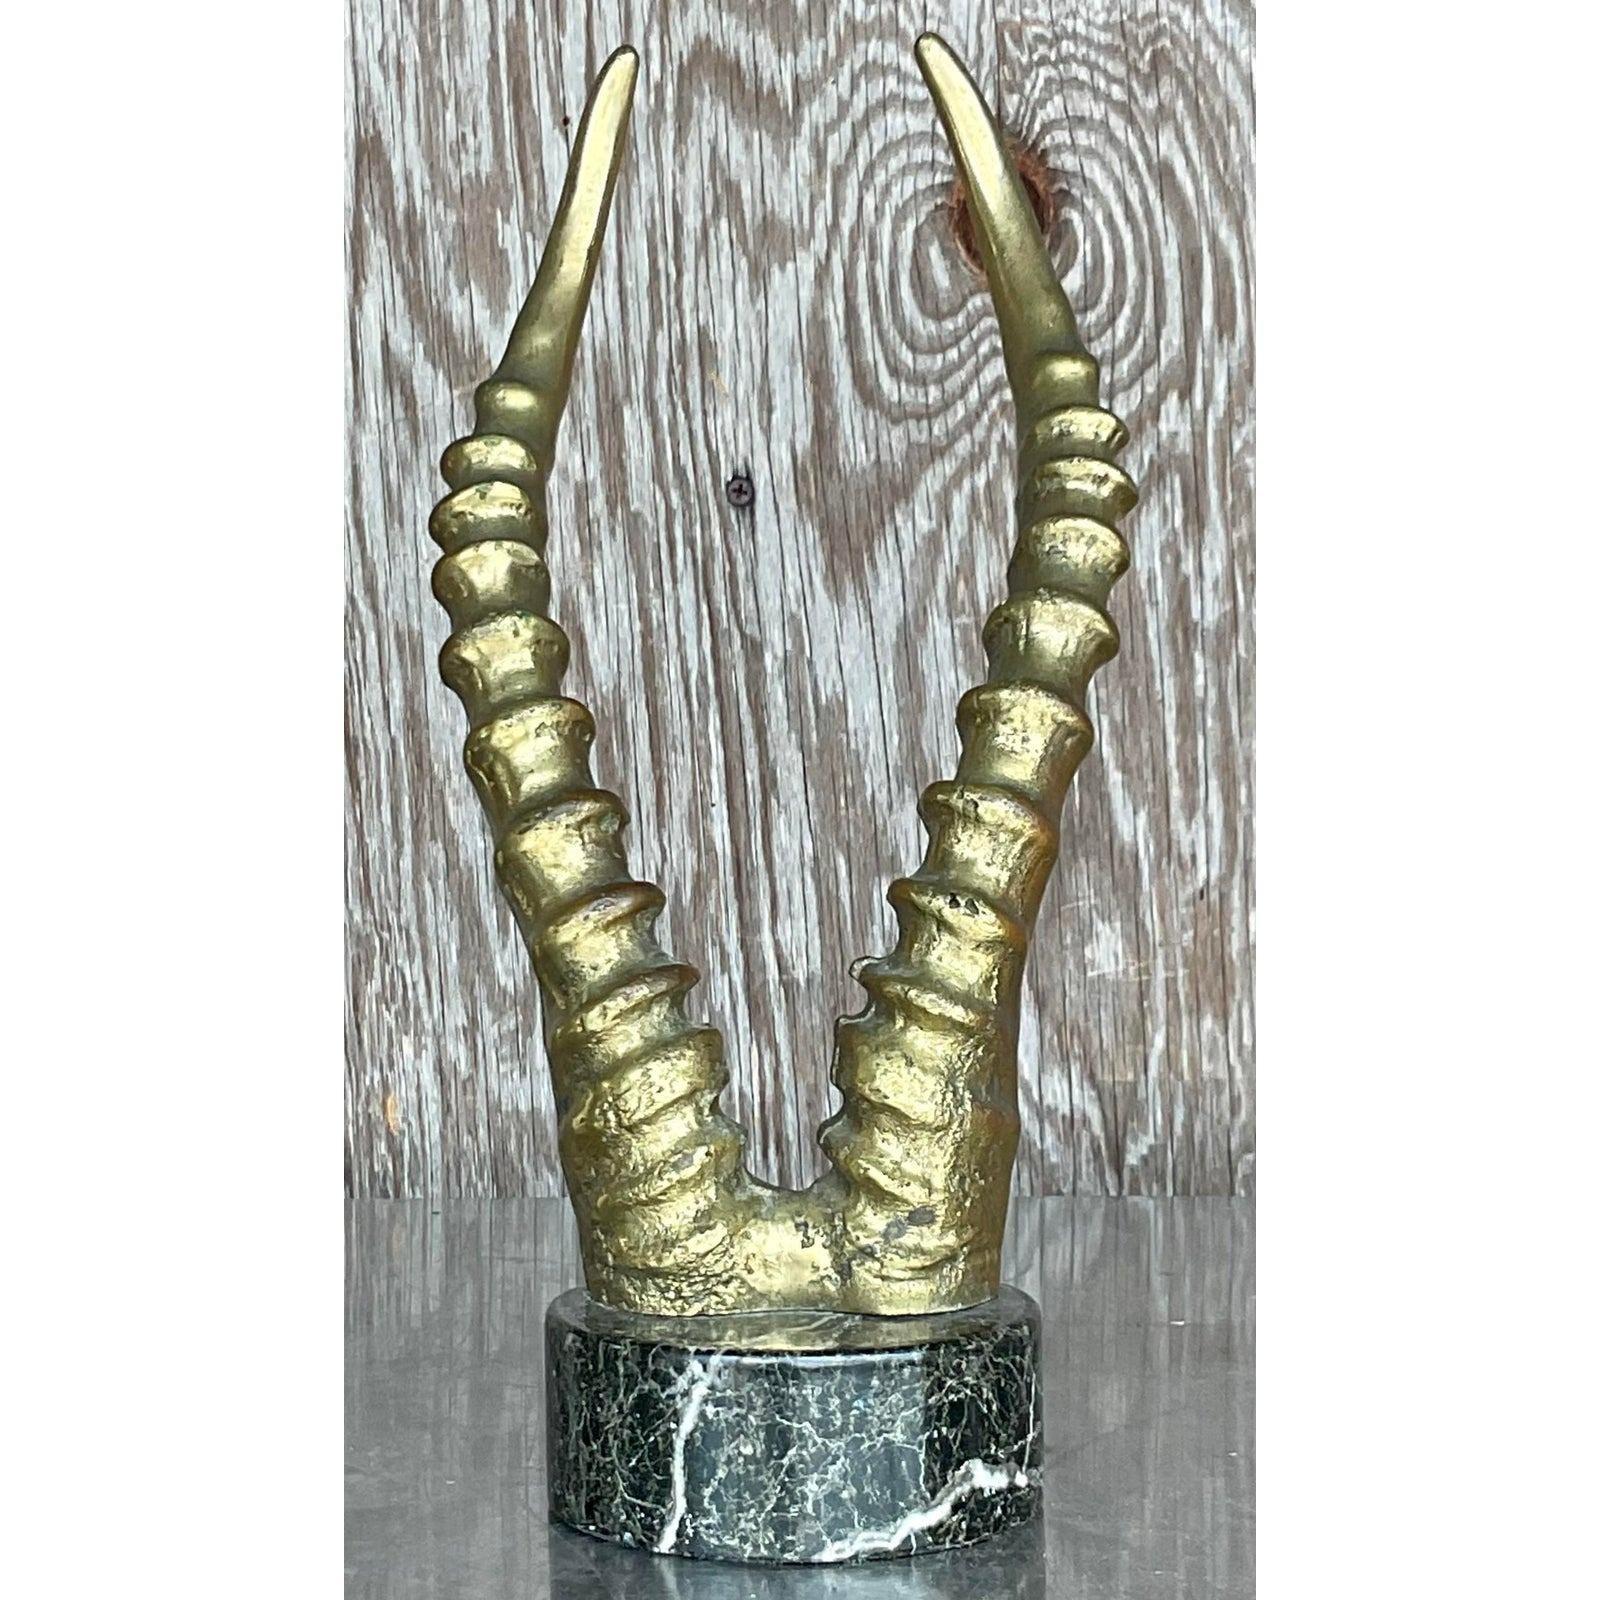 A stunning vintage sculpture of bronze antelope horns sculpture on a marble stand. Acquired at a Palm Beach estate.